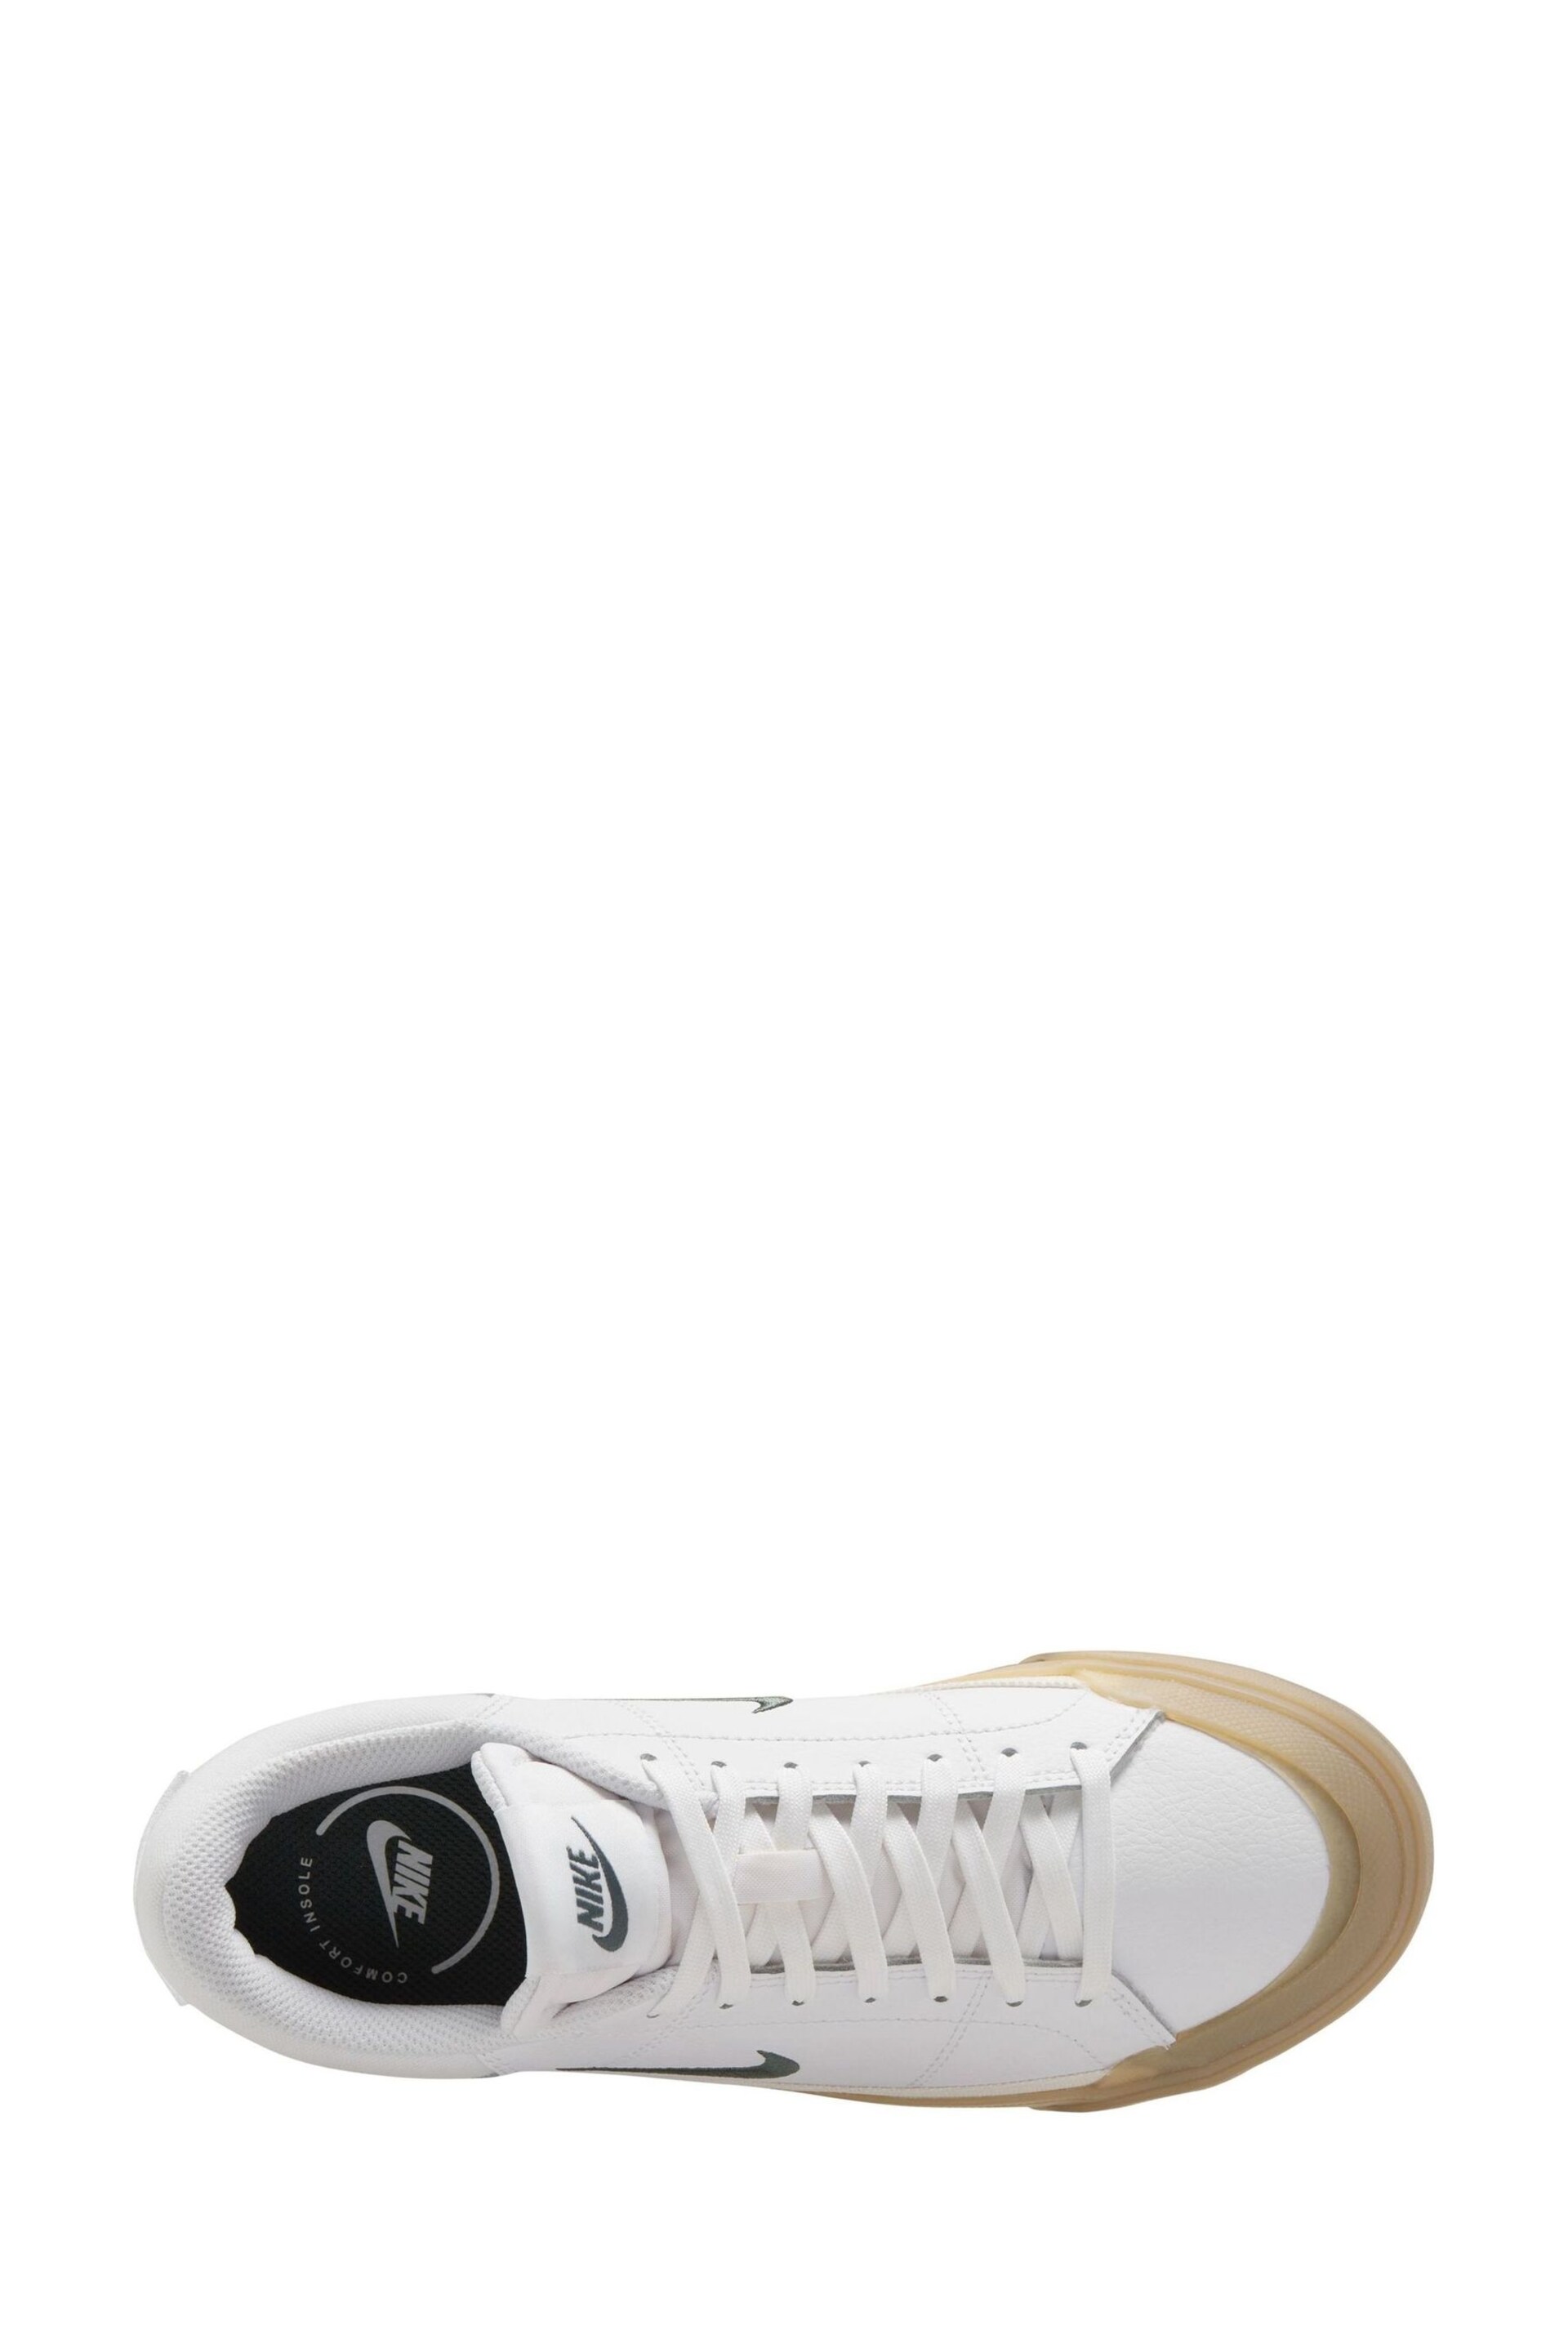 Nike White Court Legacy Lift Trainers - Image 3 of 11